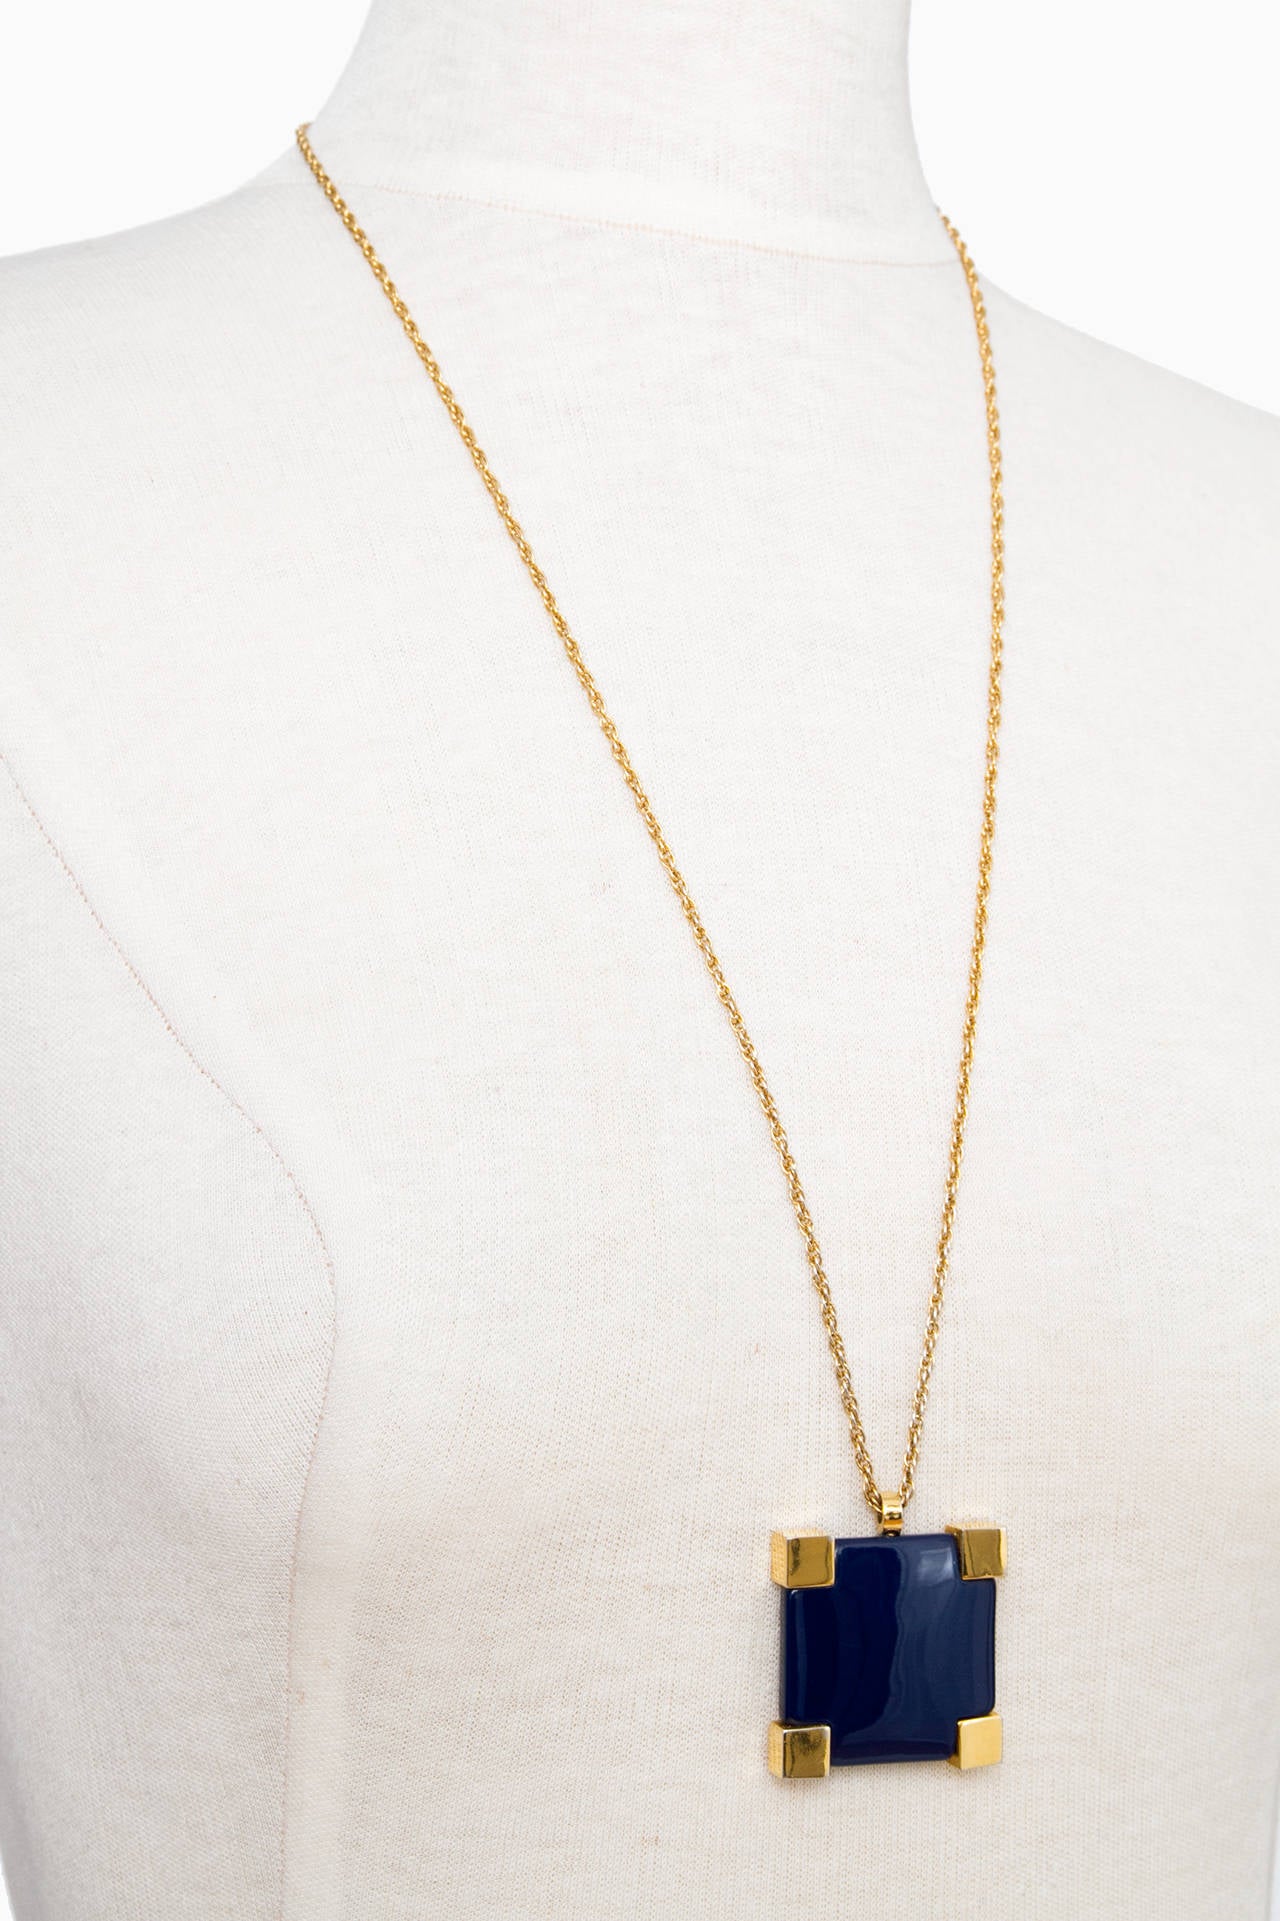 A stunning Givenchy dark blue resin pendant with gold plated square edges. The pendant is suspended to a long and delicate gold chain with 